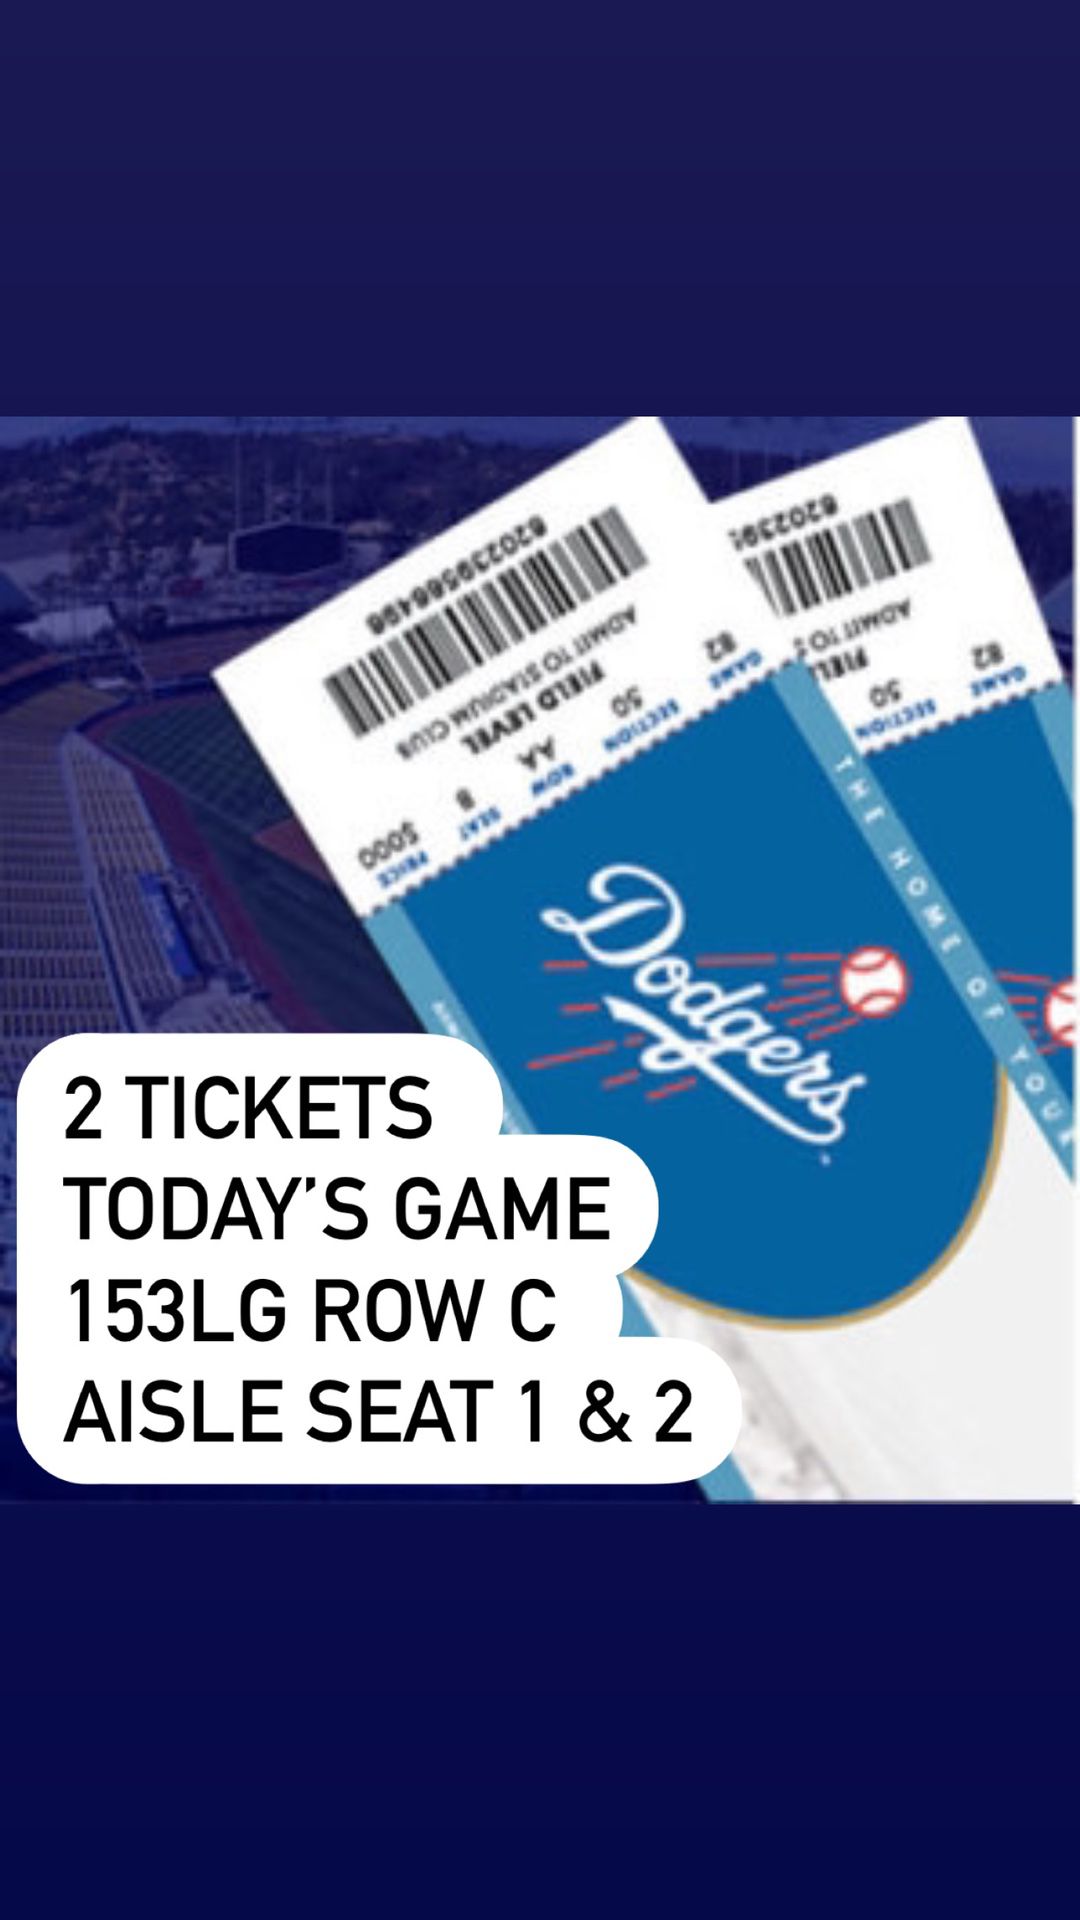 TODAY MAY 22 DODGERS TICKETS 